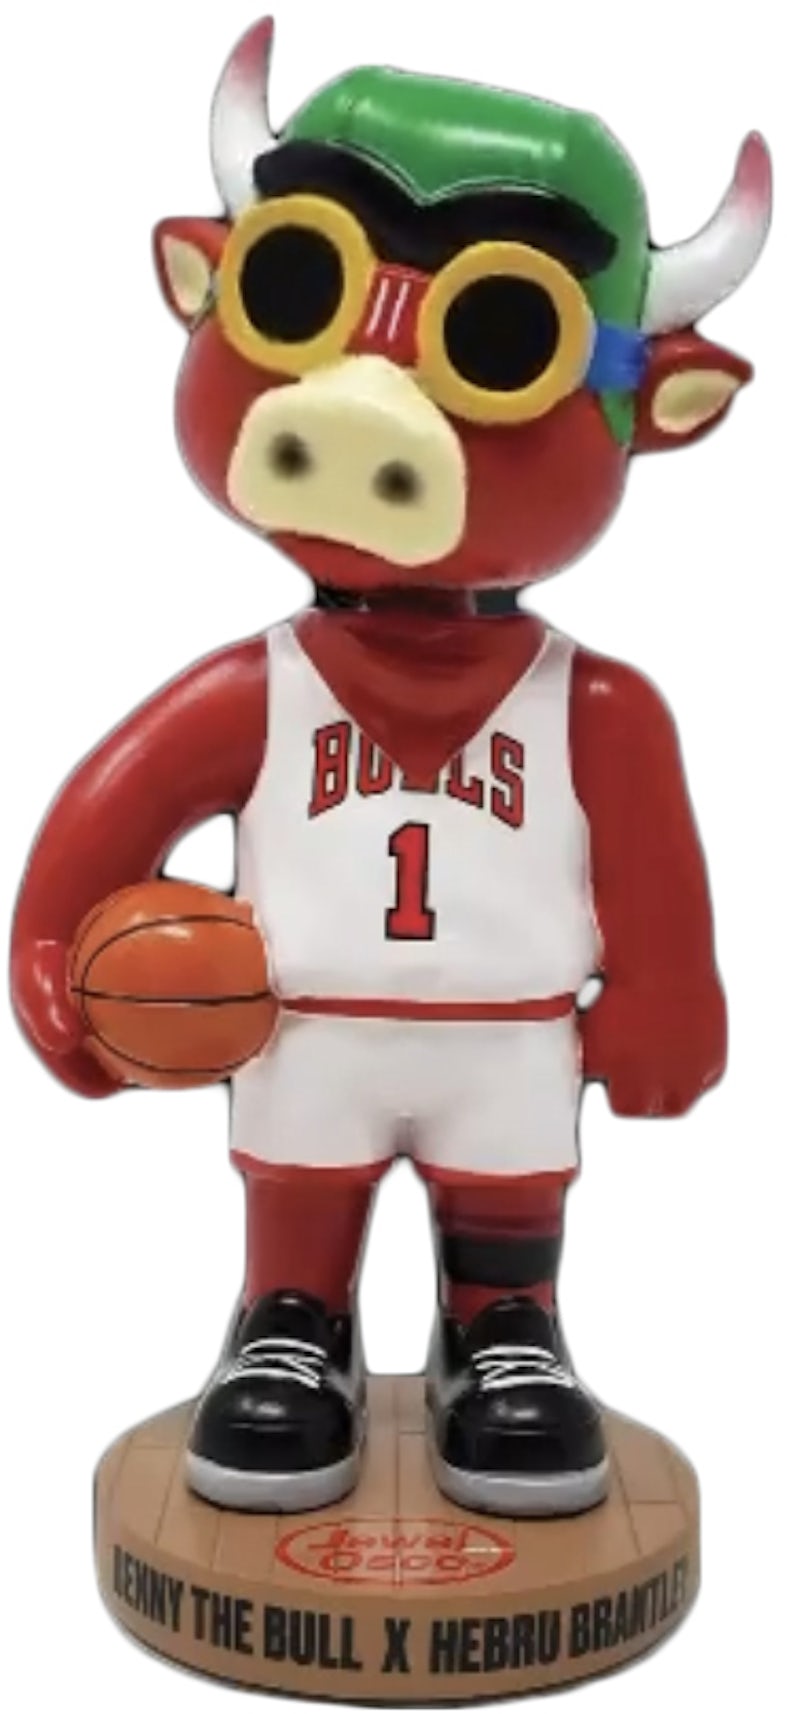 Chicago Bulls on X: Our pop-up Bull Market team shop outside the